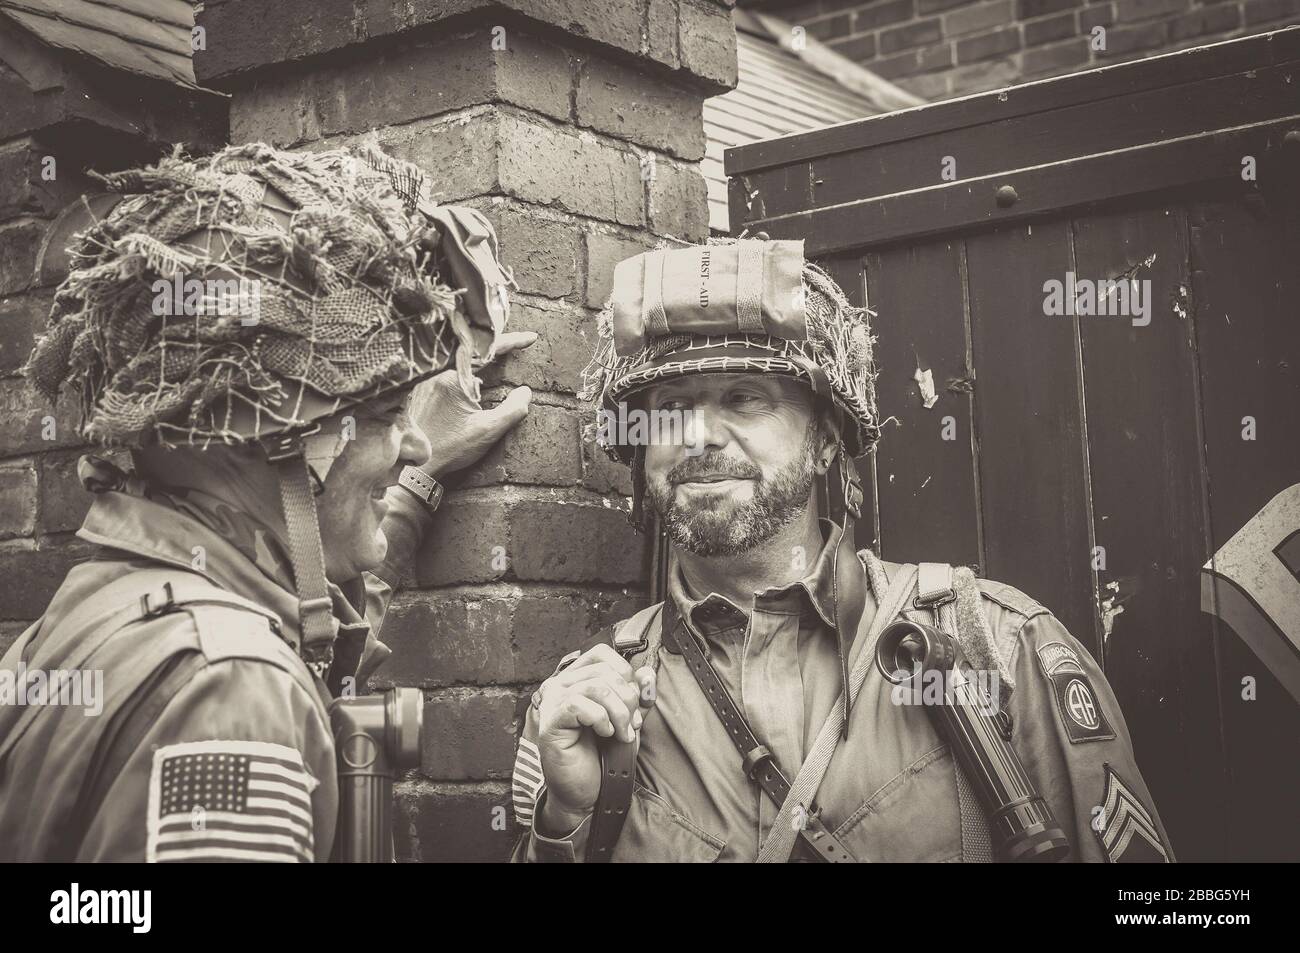 Friends smiling, young men chatting together in costume as American US military men soldiers, 1940's summer event, Black Country Living Museum, UK. Stock Photo